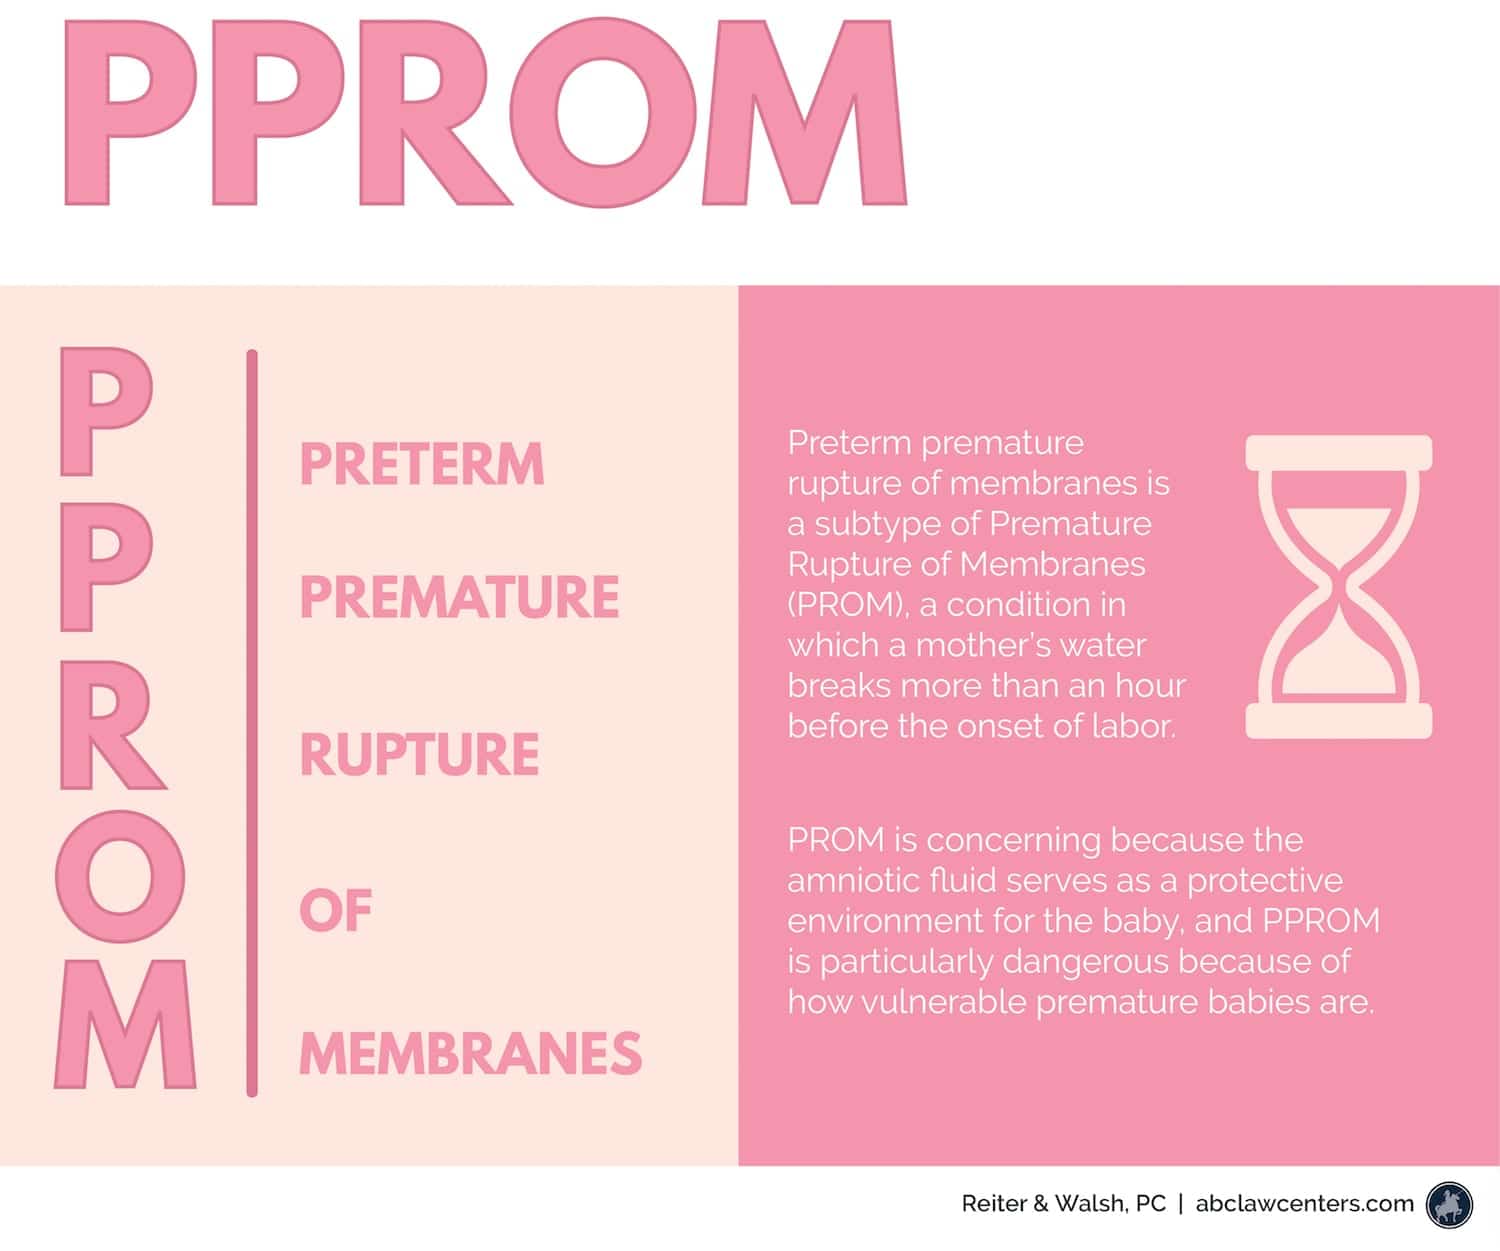 What is PPROM and how should it be managed?